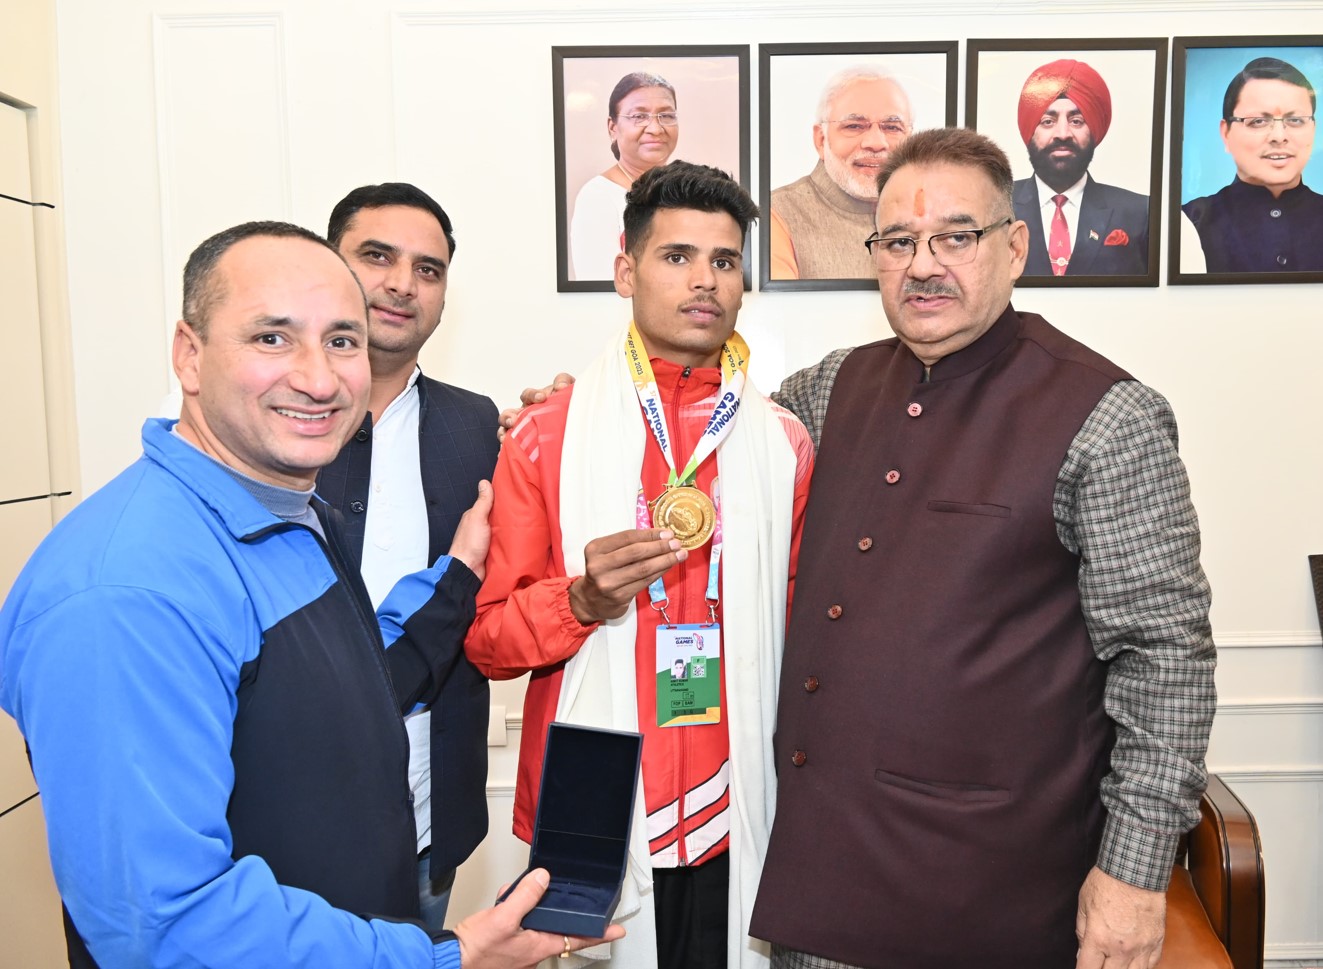 ﻿ Ankit Kumar, who won gold medal in the race, met Minister Joshi.